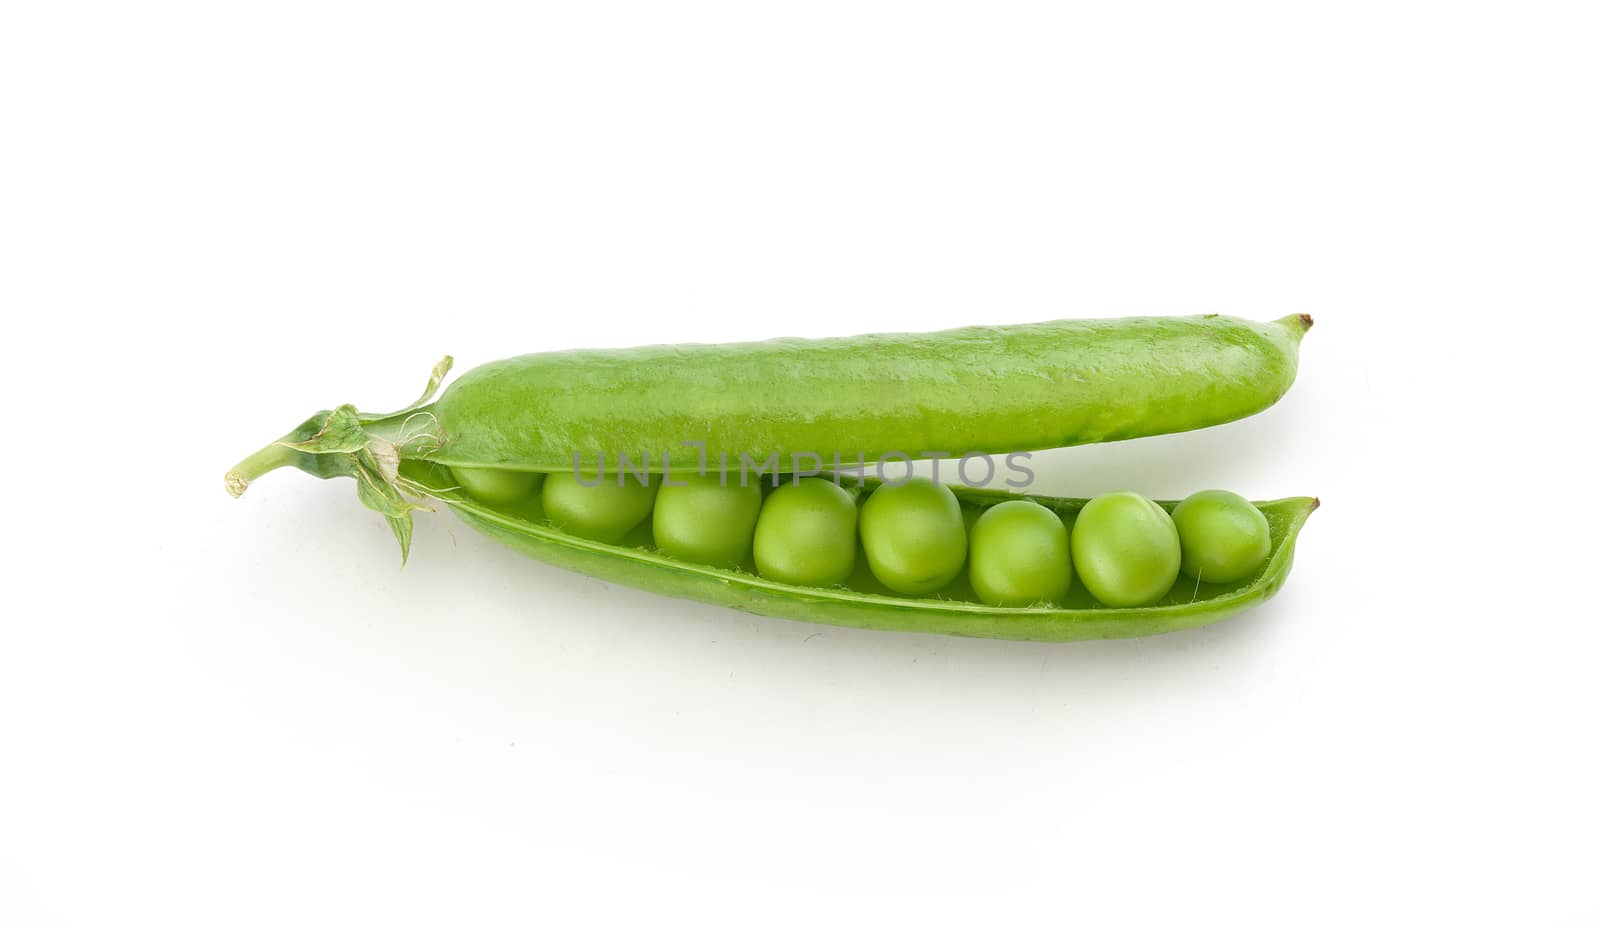 Top view of fresh green pea pod with peas on the white background